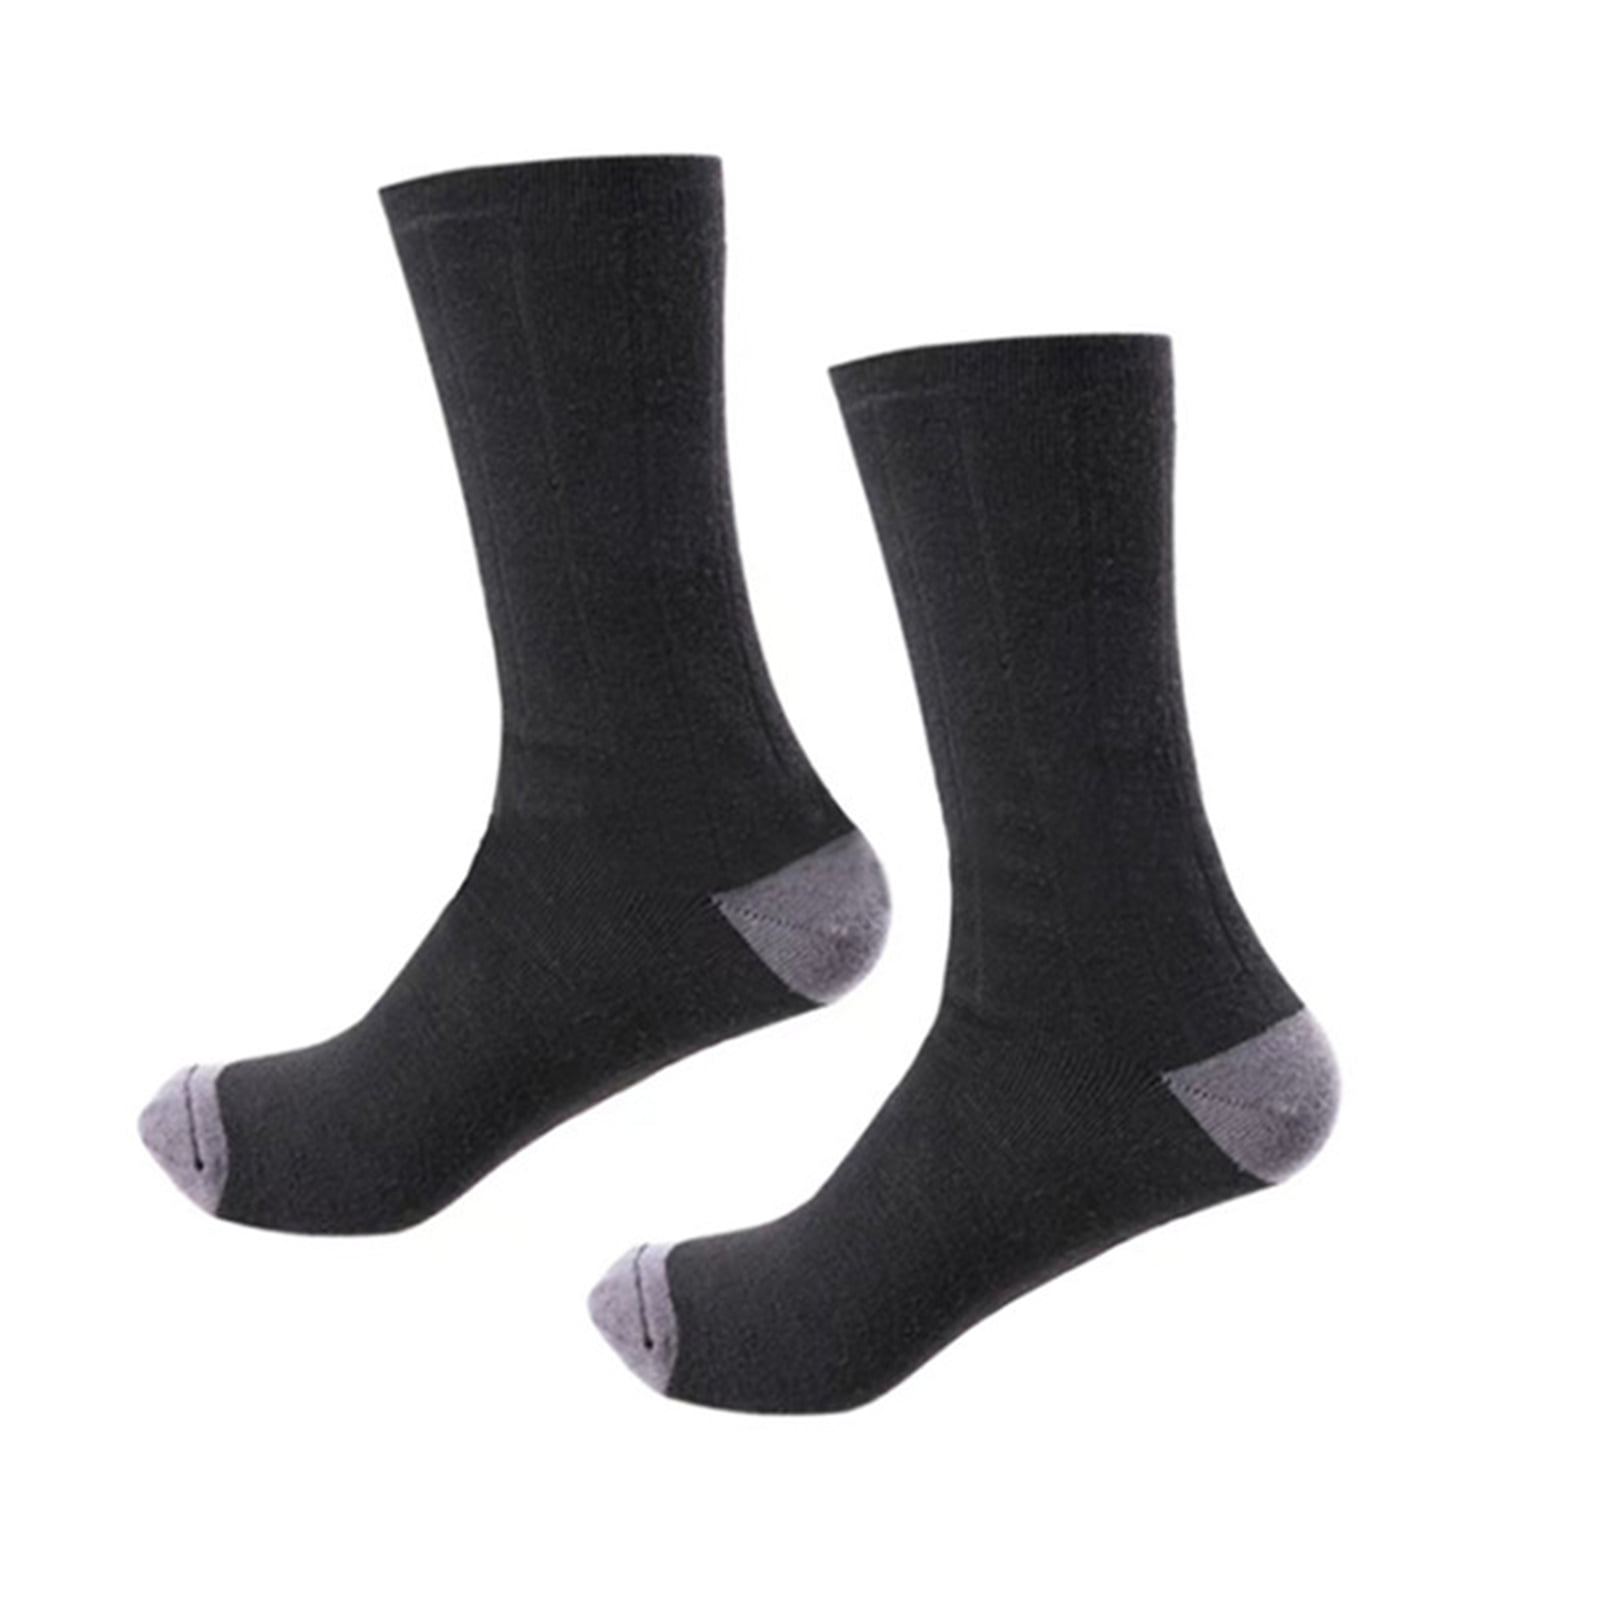 Wowspeed Electric Heating Socks | Ski Socks for Women | Rechargeable ...